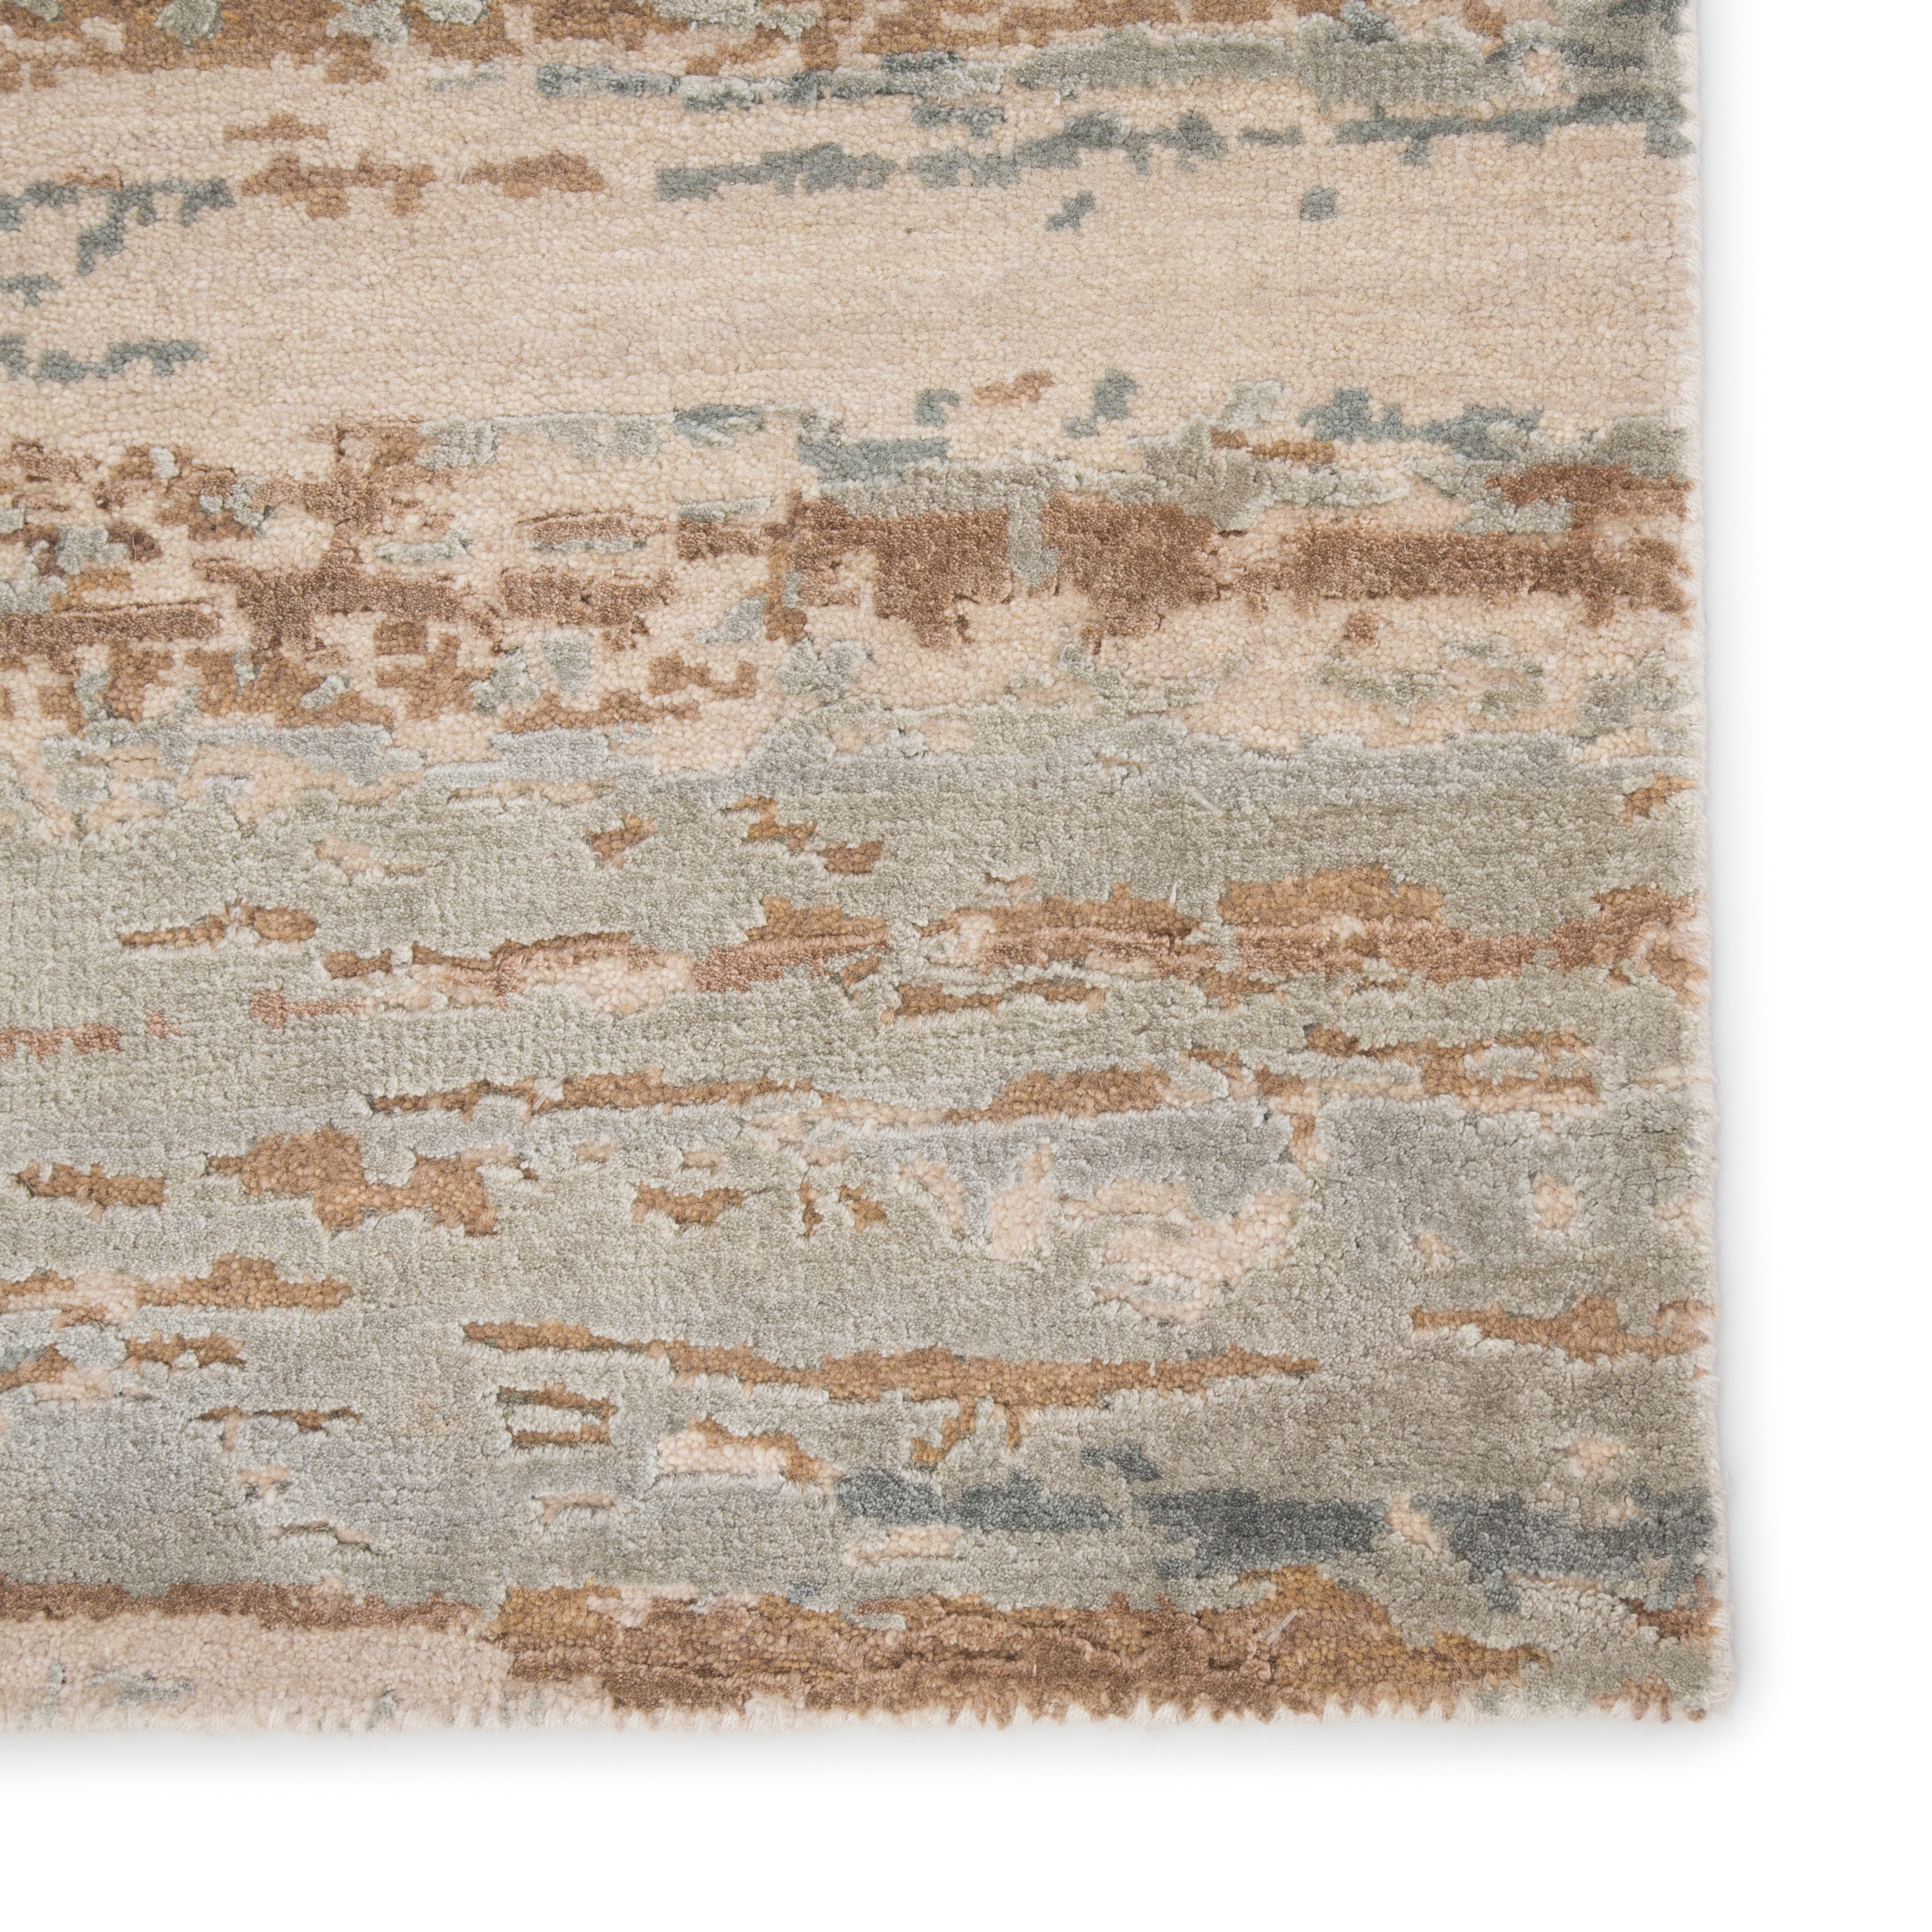 Kavi by Bandi Hand-Knotted Abstract Light Blue/ Tan Area Rug (9'X12') - Image 3